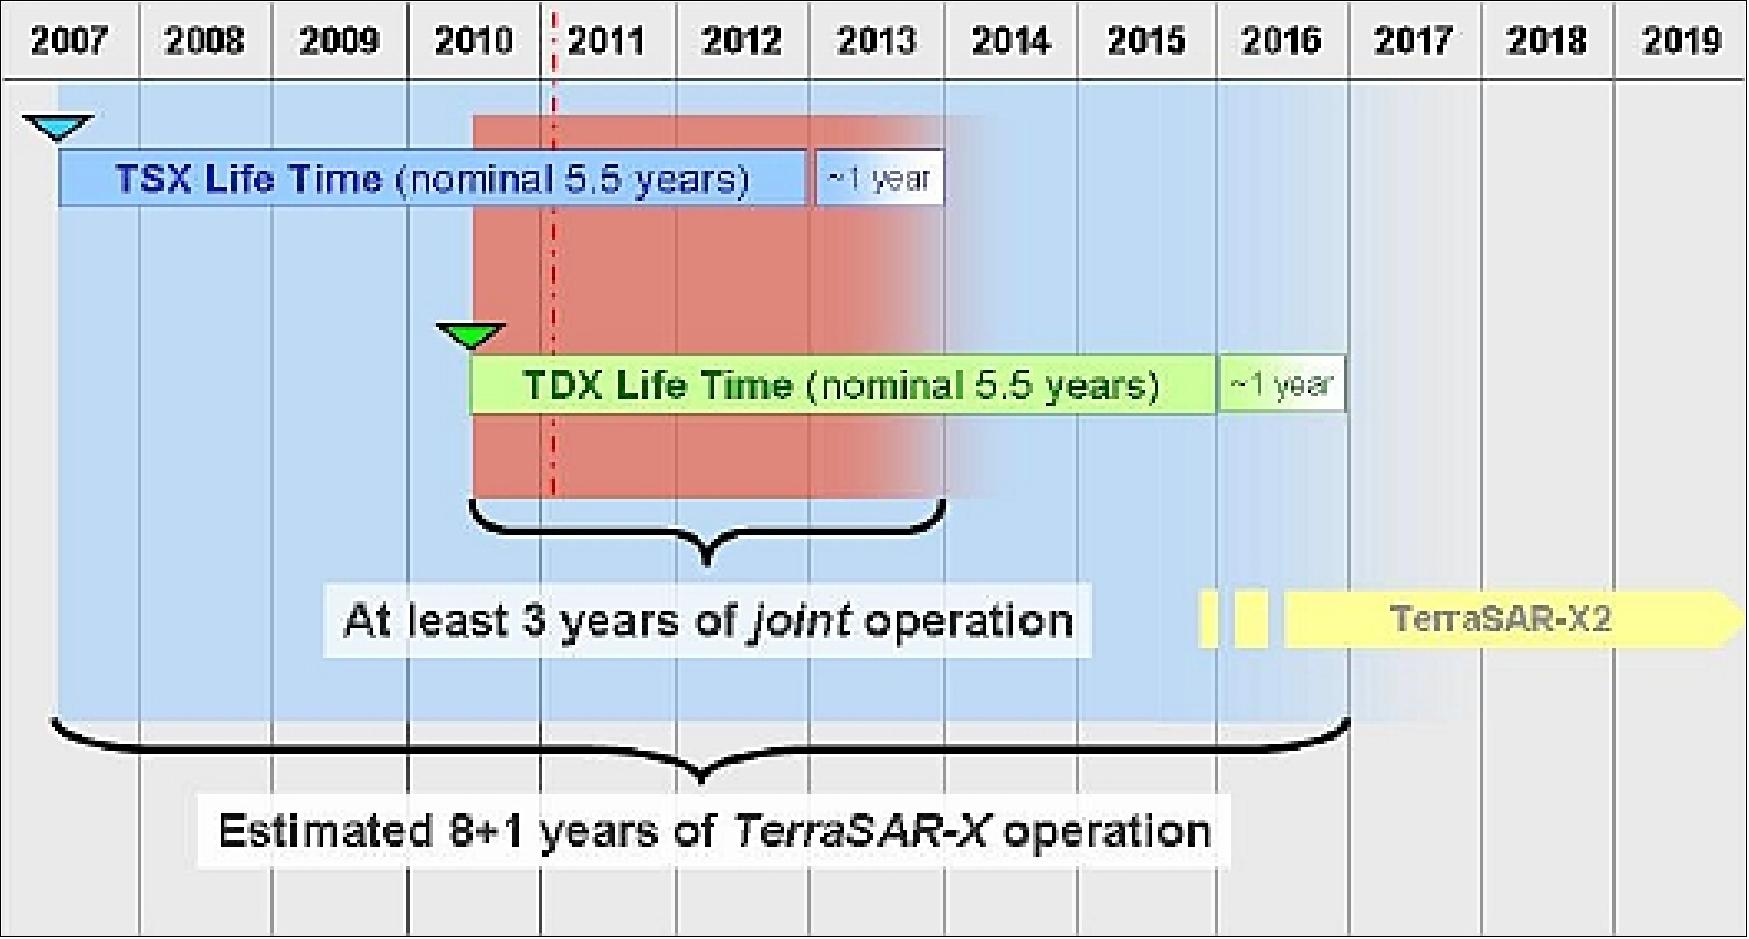 Figure 73: Projected in-orbit lifetimes of TSX and TDX (image credit: DLR, Ref. 118)